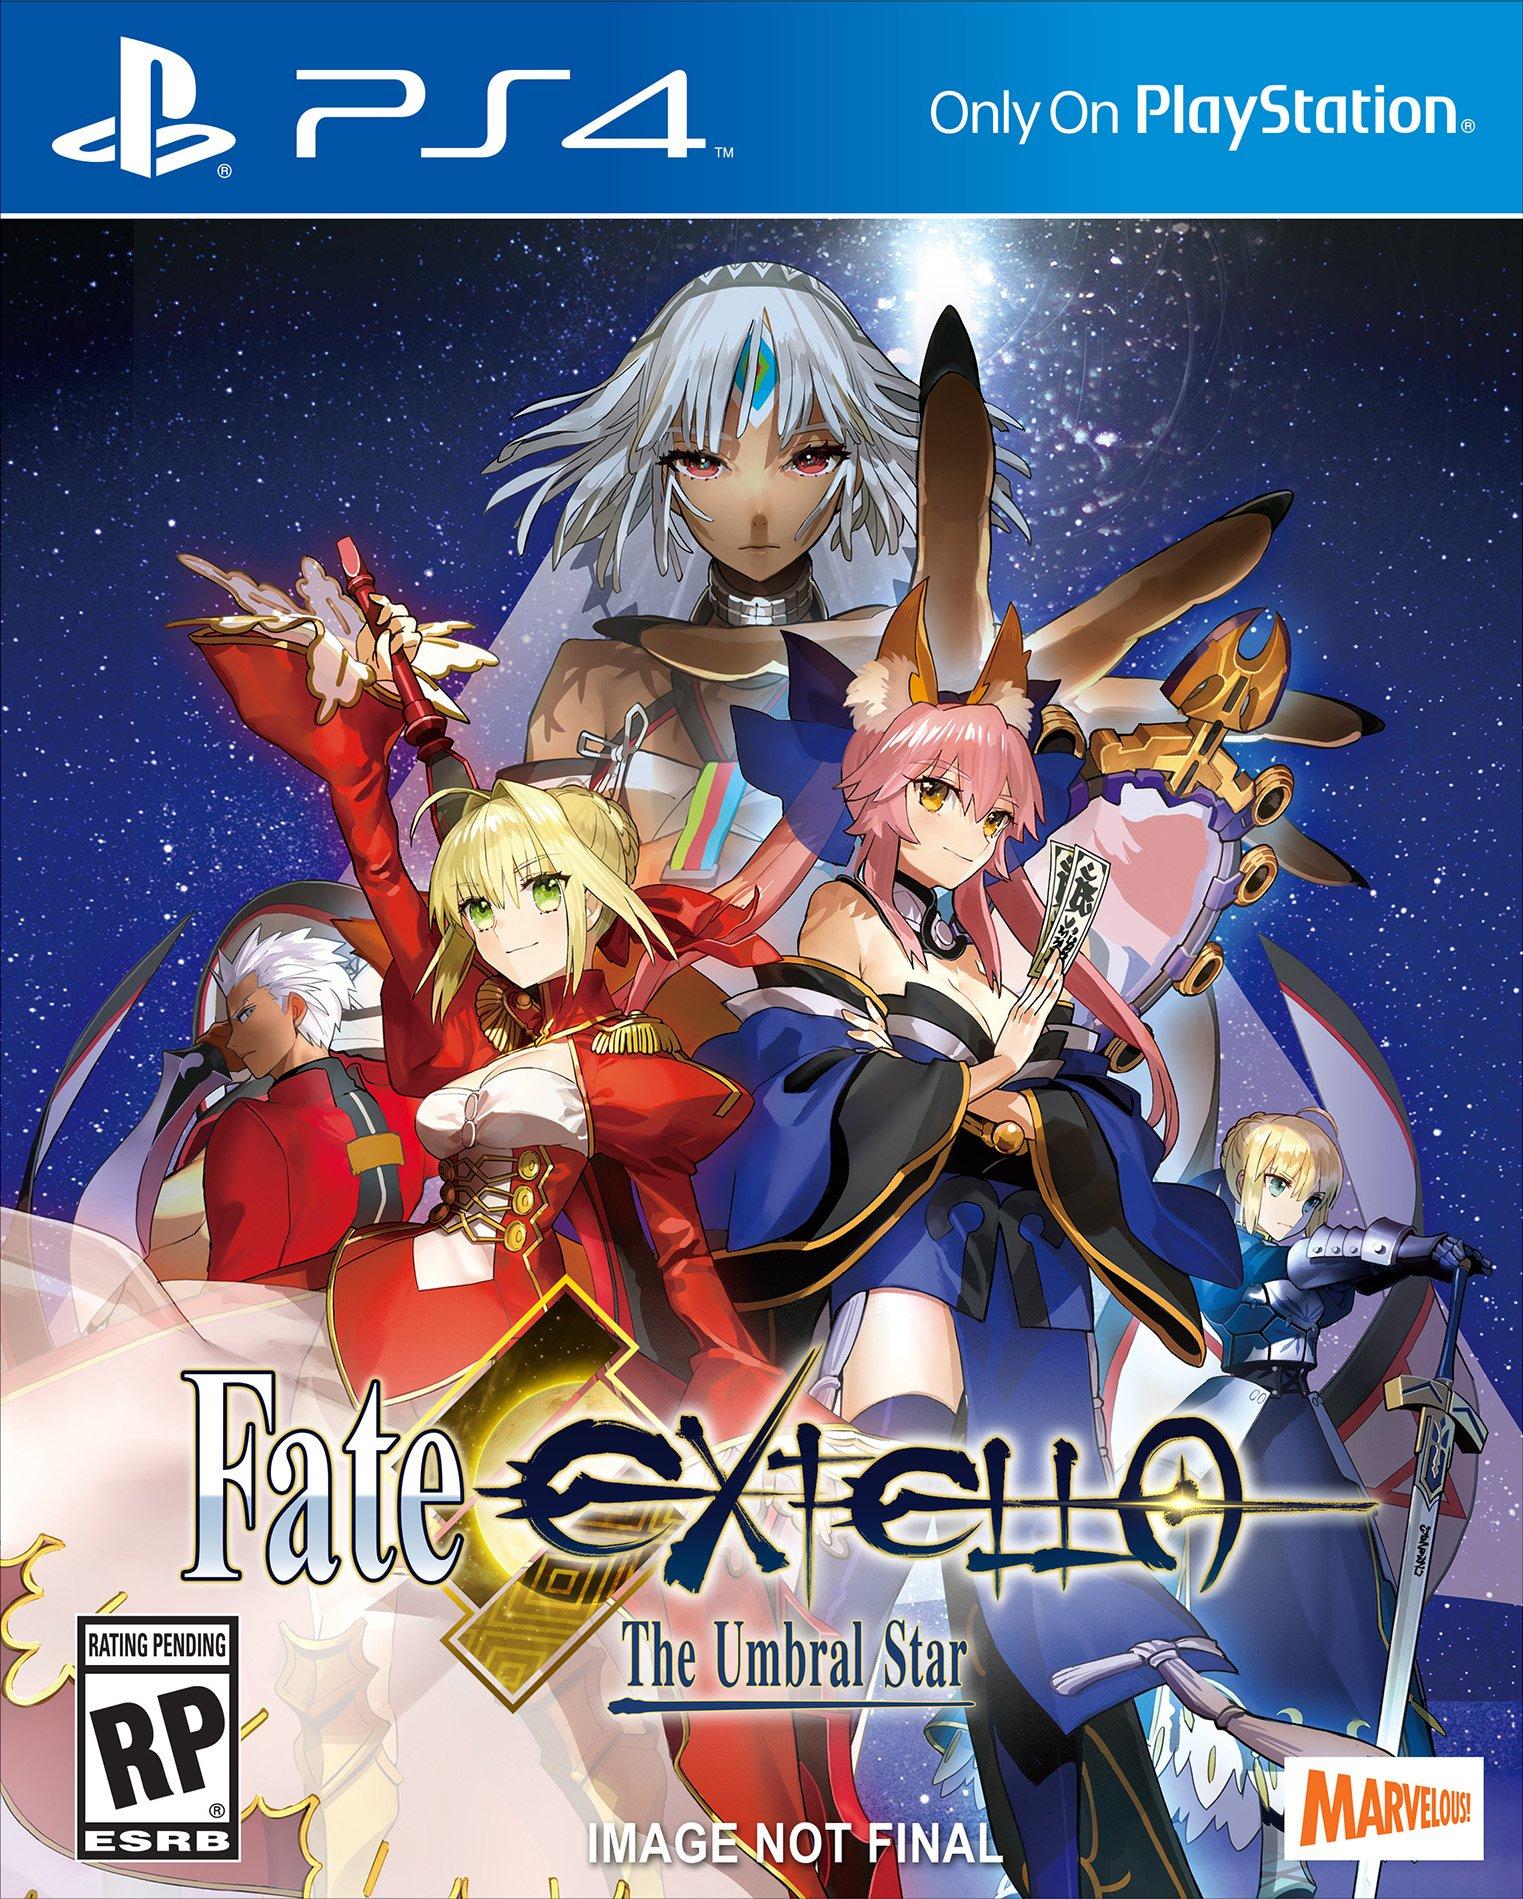 Fate/EXTELLA: The Umbral Star - PlayStation 4 | XSEED Games | GameStop